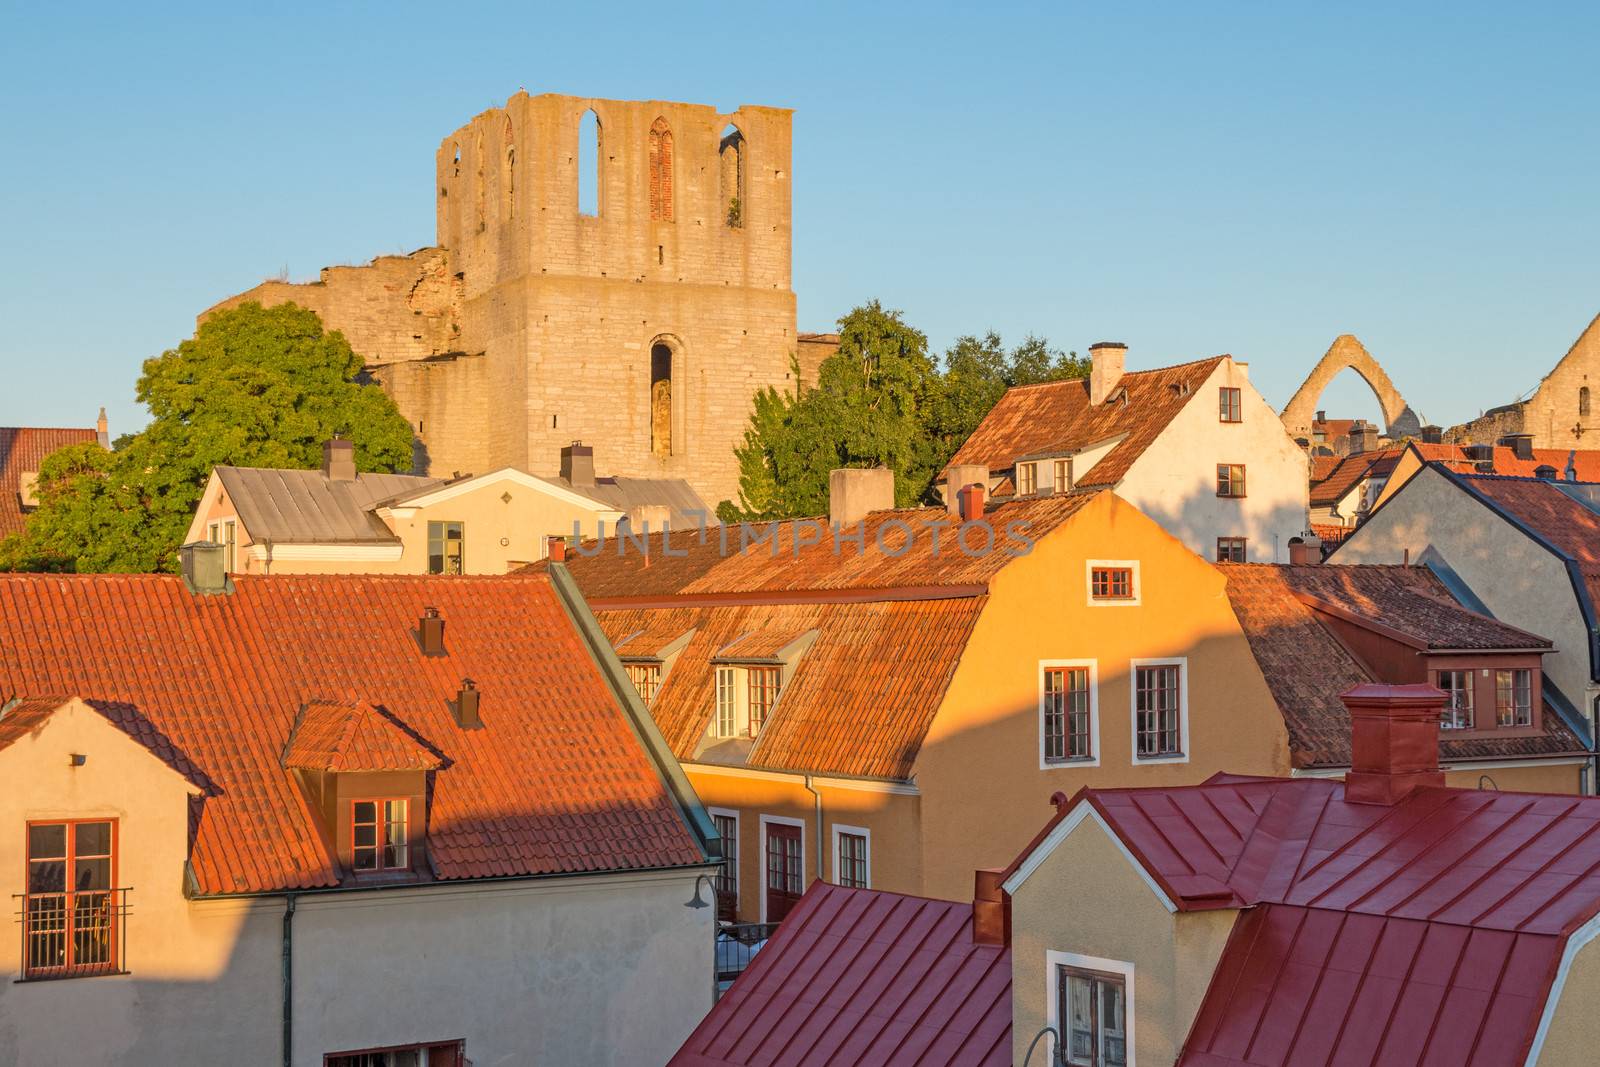 Rooftops and a medieval fortress in Visby, Sweden by anikasalsera